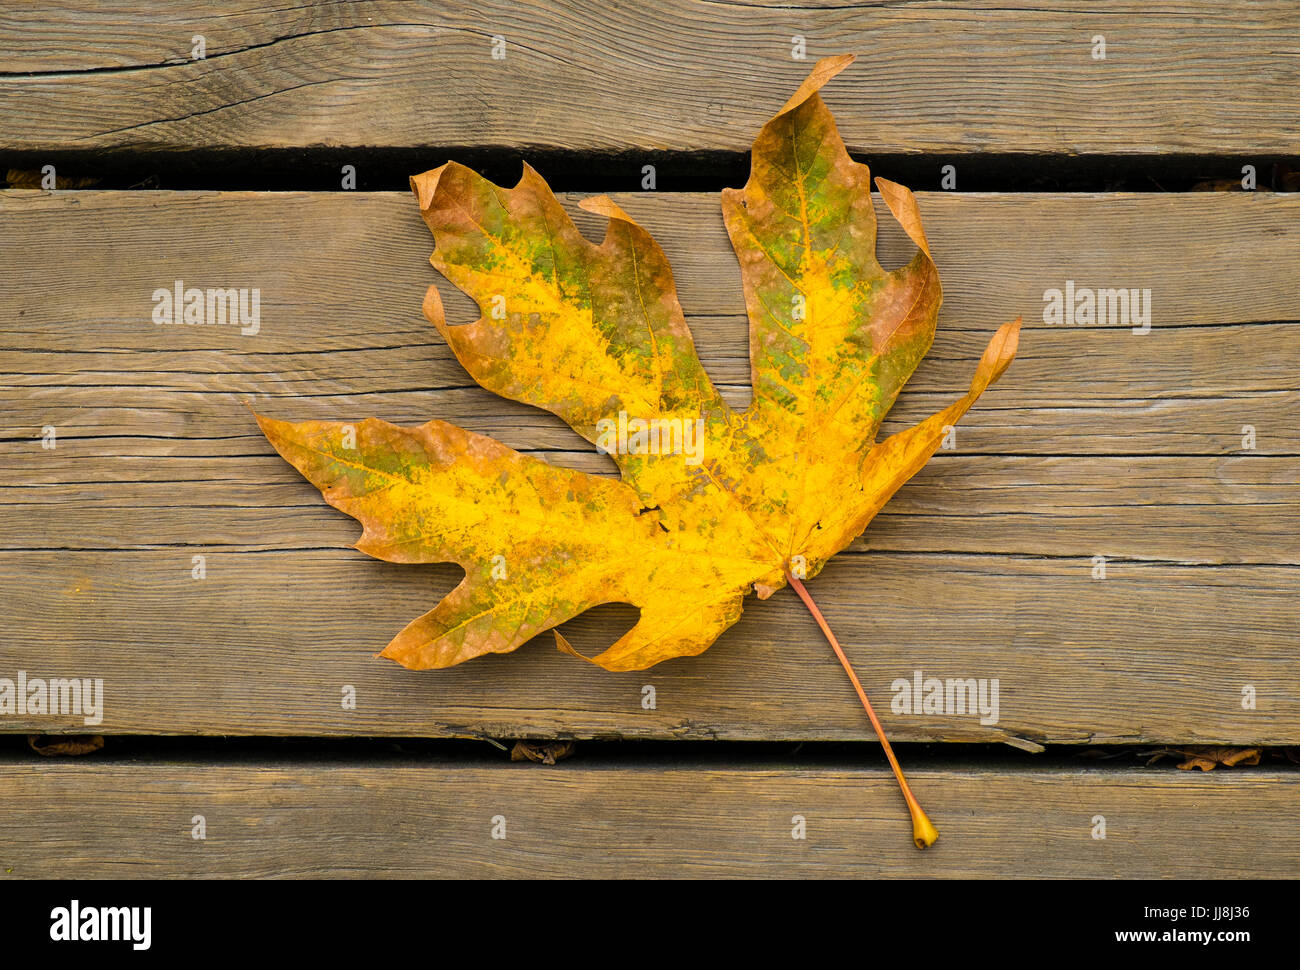 A leaf of the Bigleaf Maple, showing autumn colours, lays on a wooden boardwalk Stock Photo